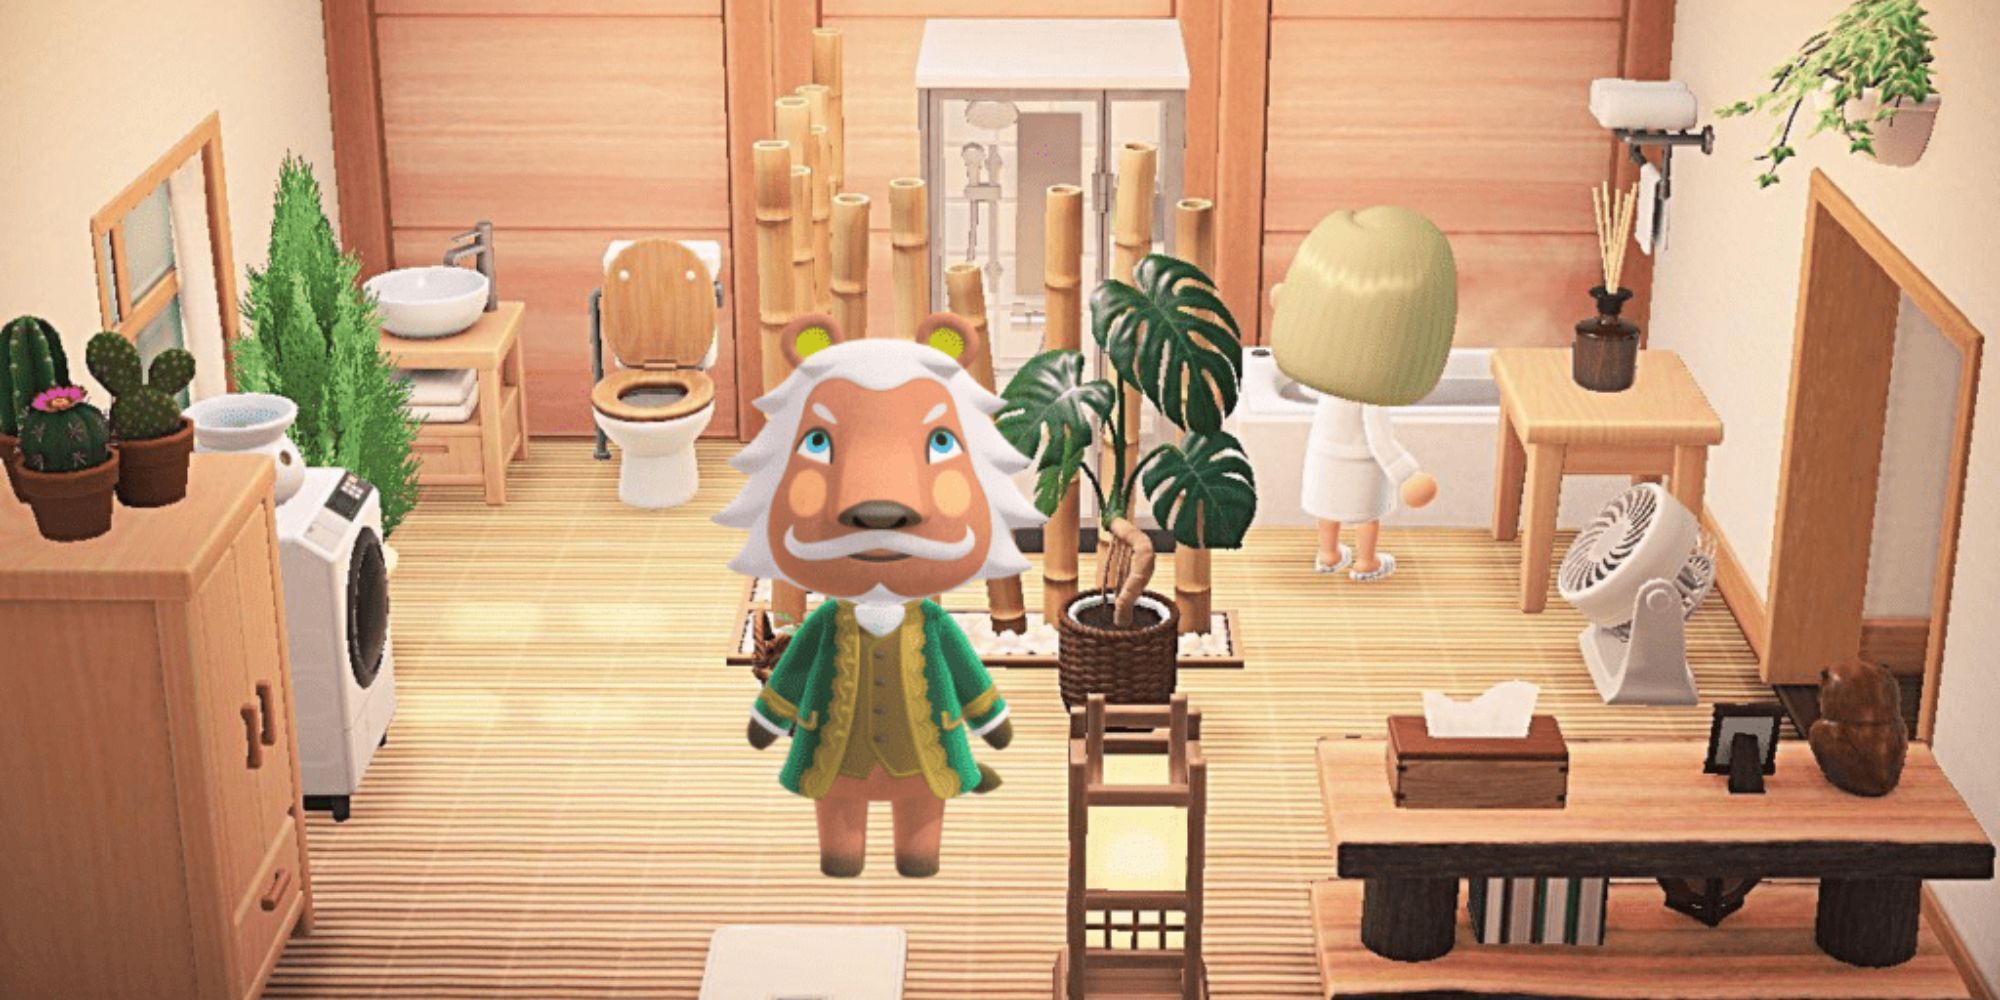 Lionel stands in a house full of furniture as a villager stands by a bathtub